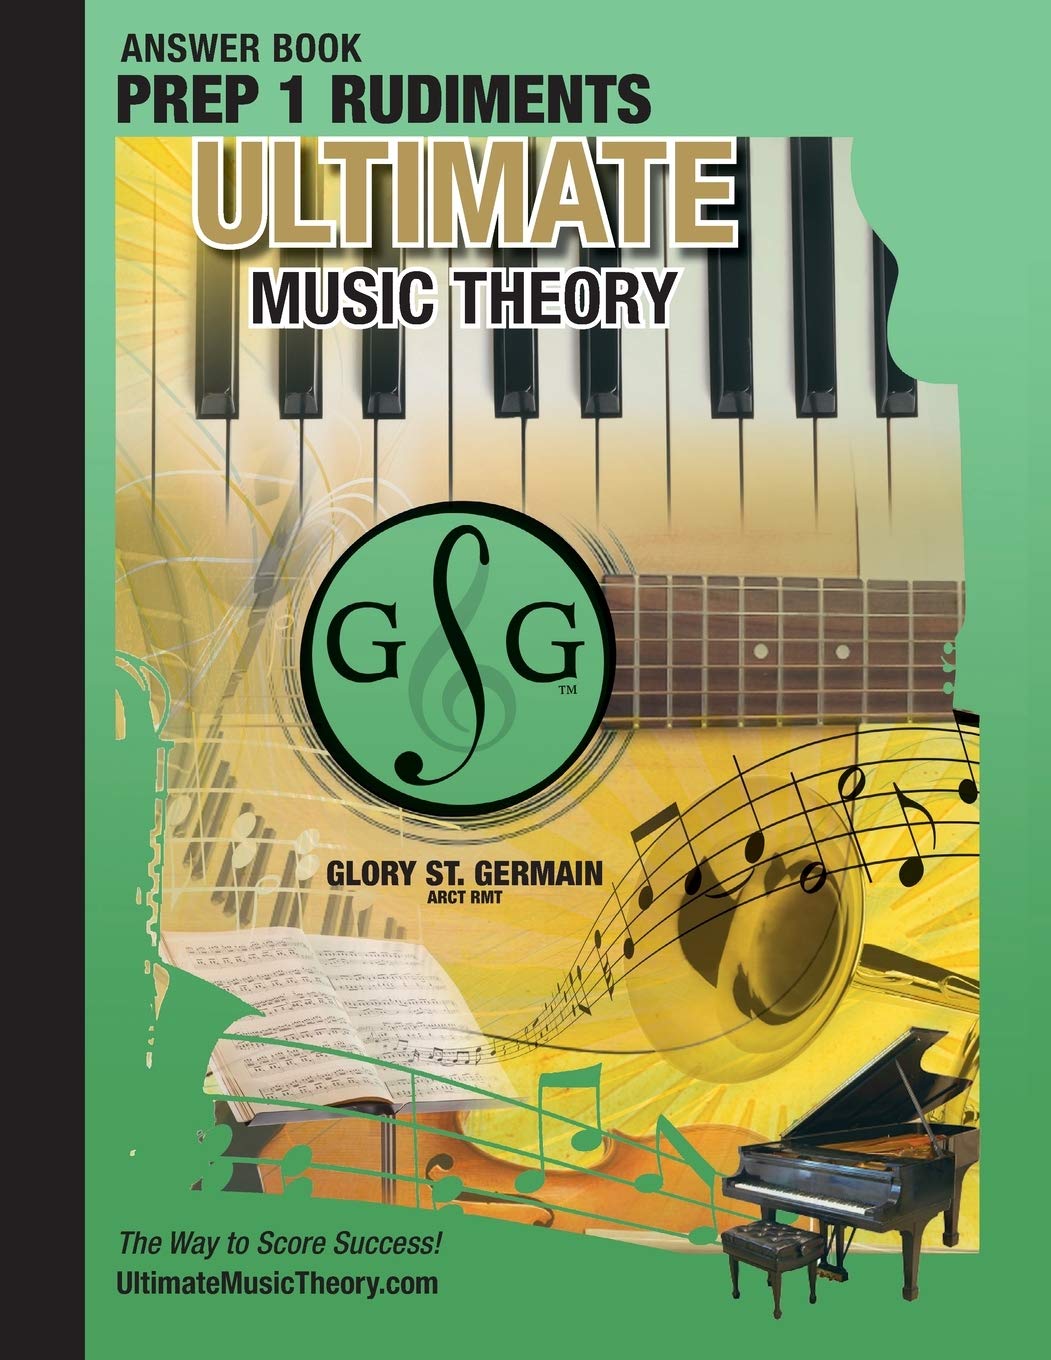 Ultimate Music Theory - Prep 1 Rudiments, Answer Book